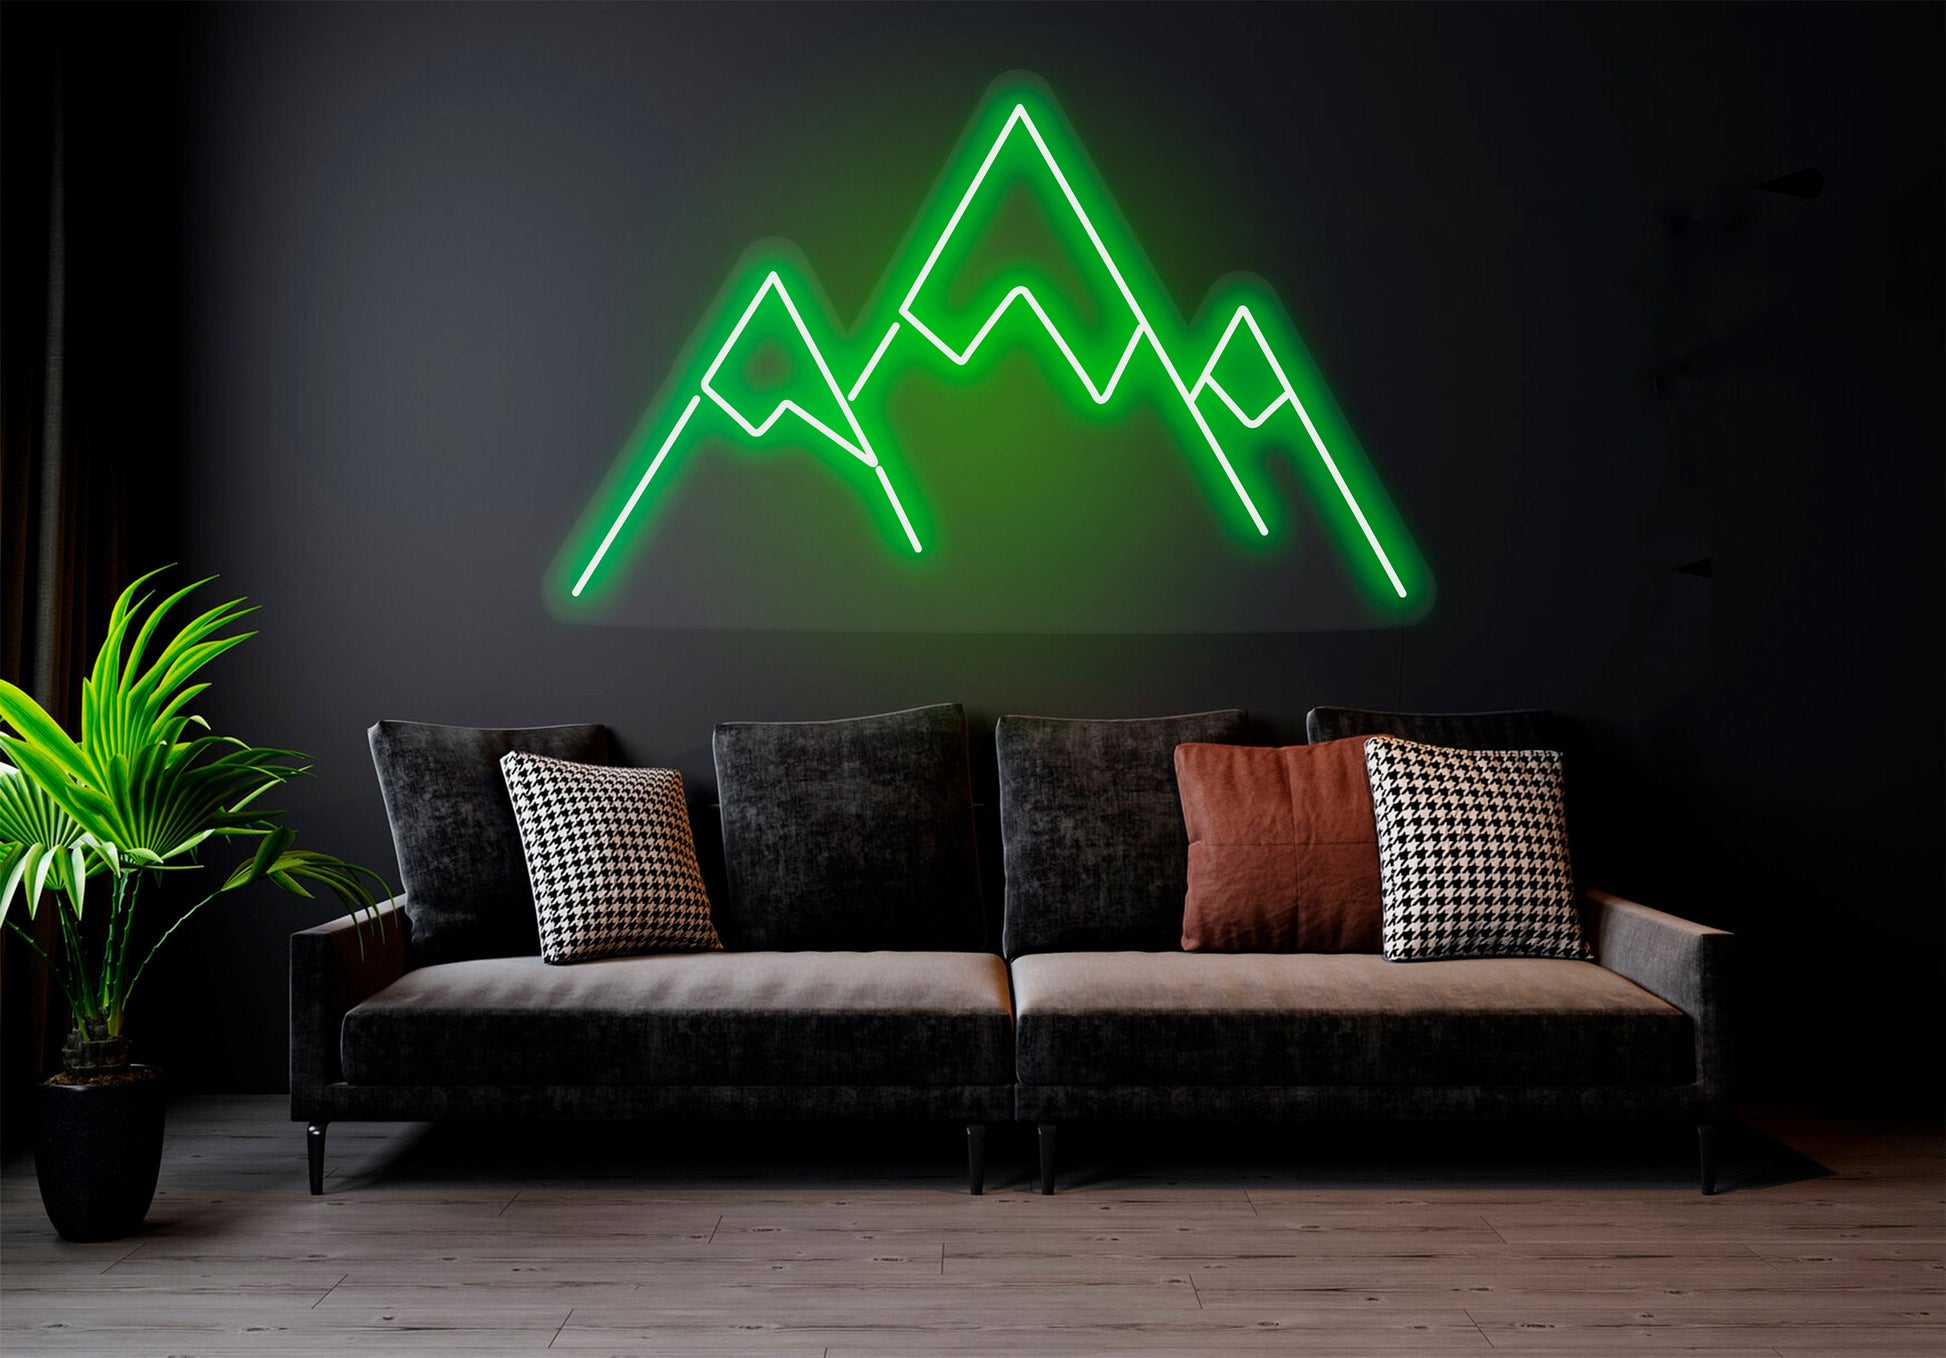 Mountain Tops - LED Neon Sign,Mountain led sign,Mountain led light,Mountain wall decor,Neon sign mountain,Neon sign wall art,Neon sign wall